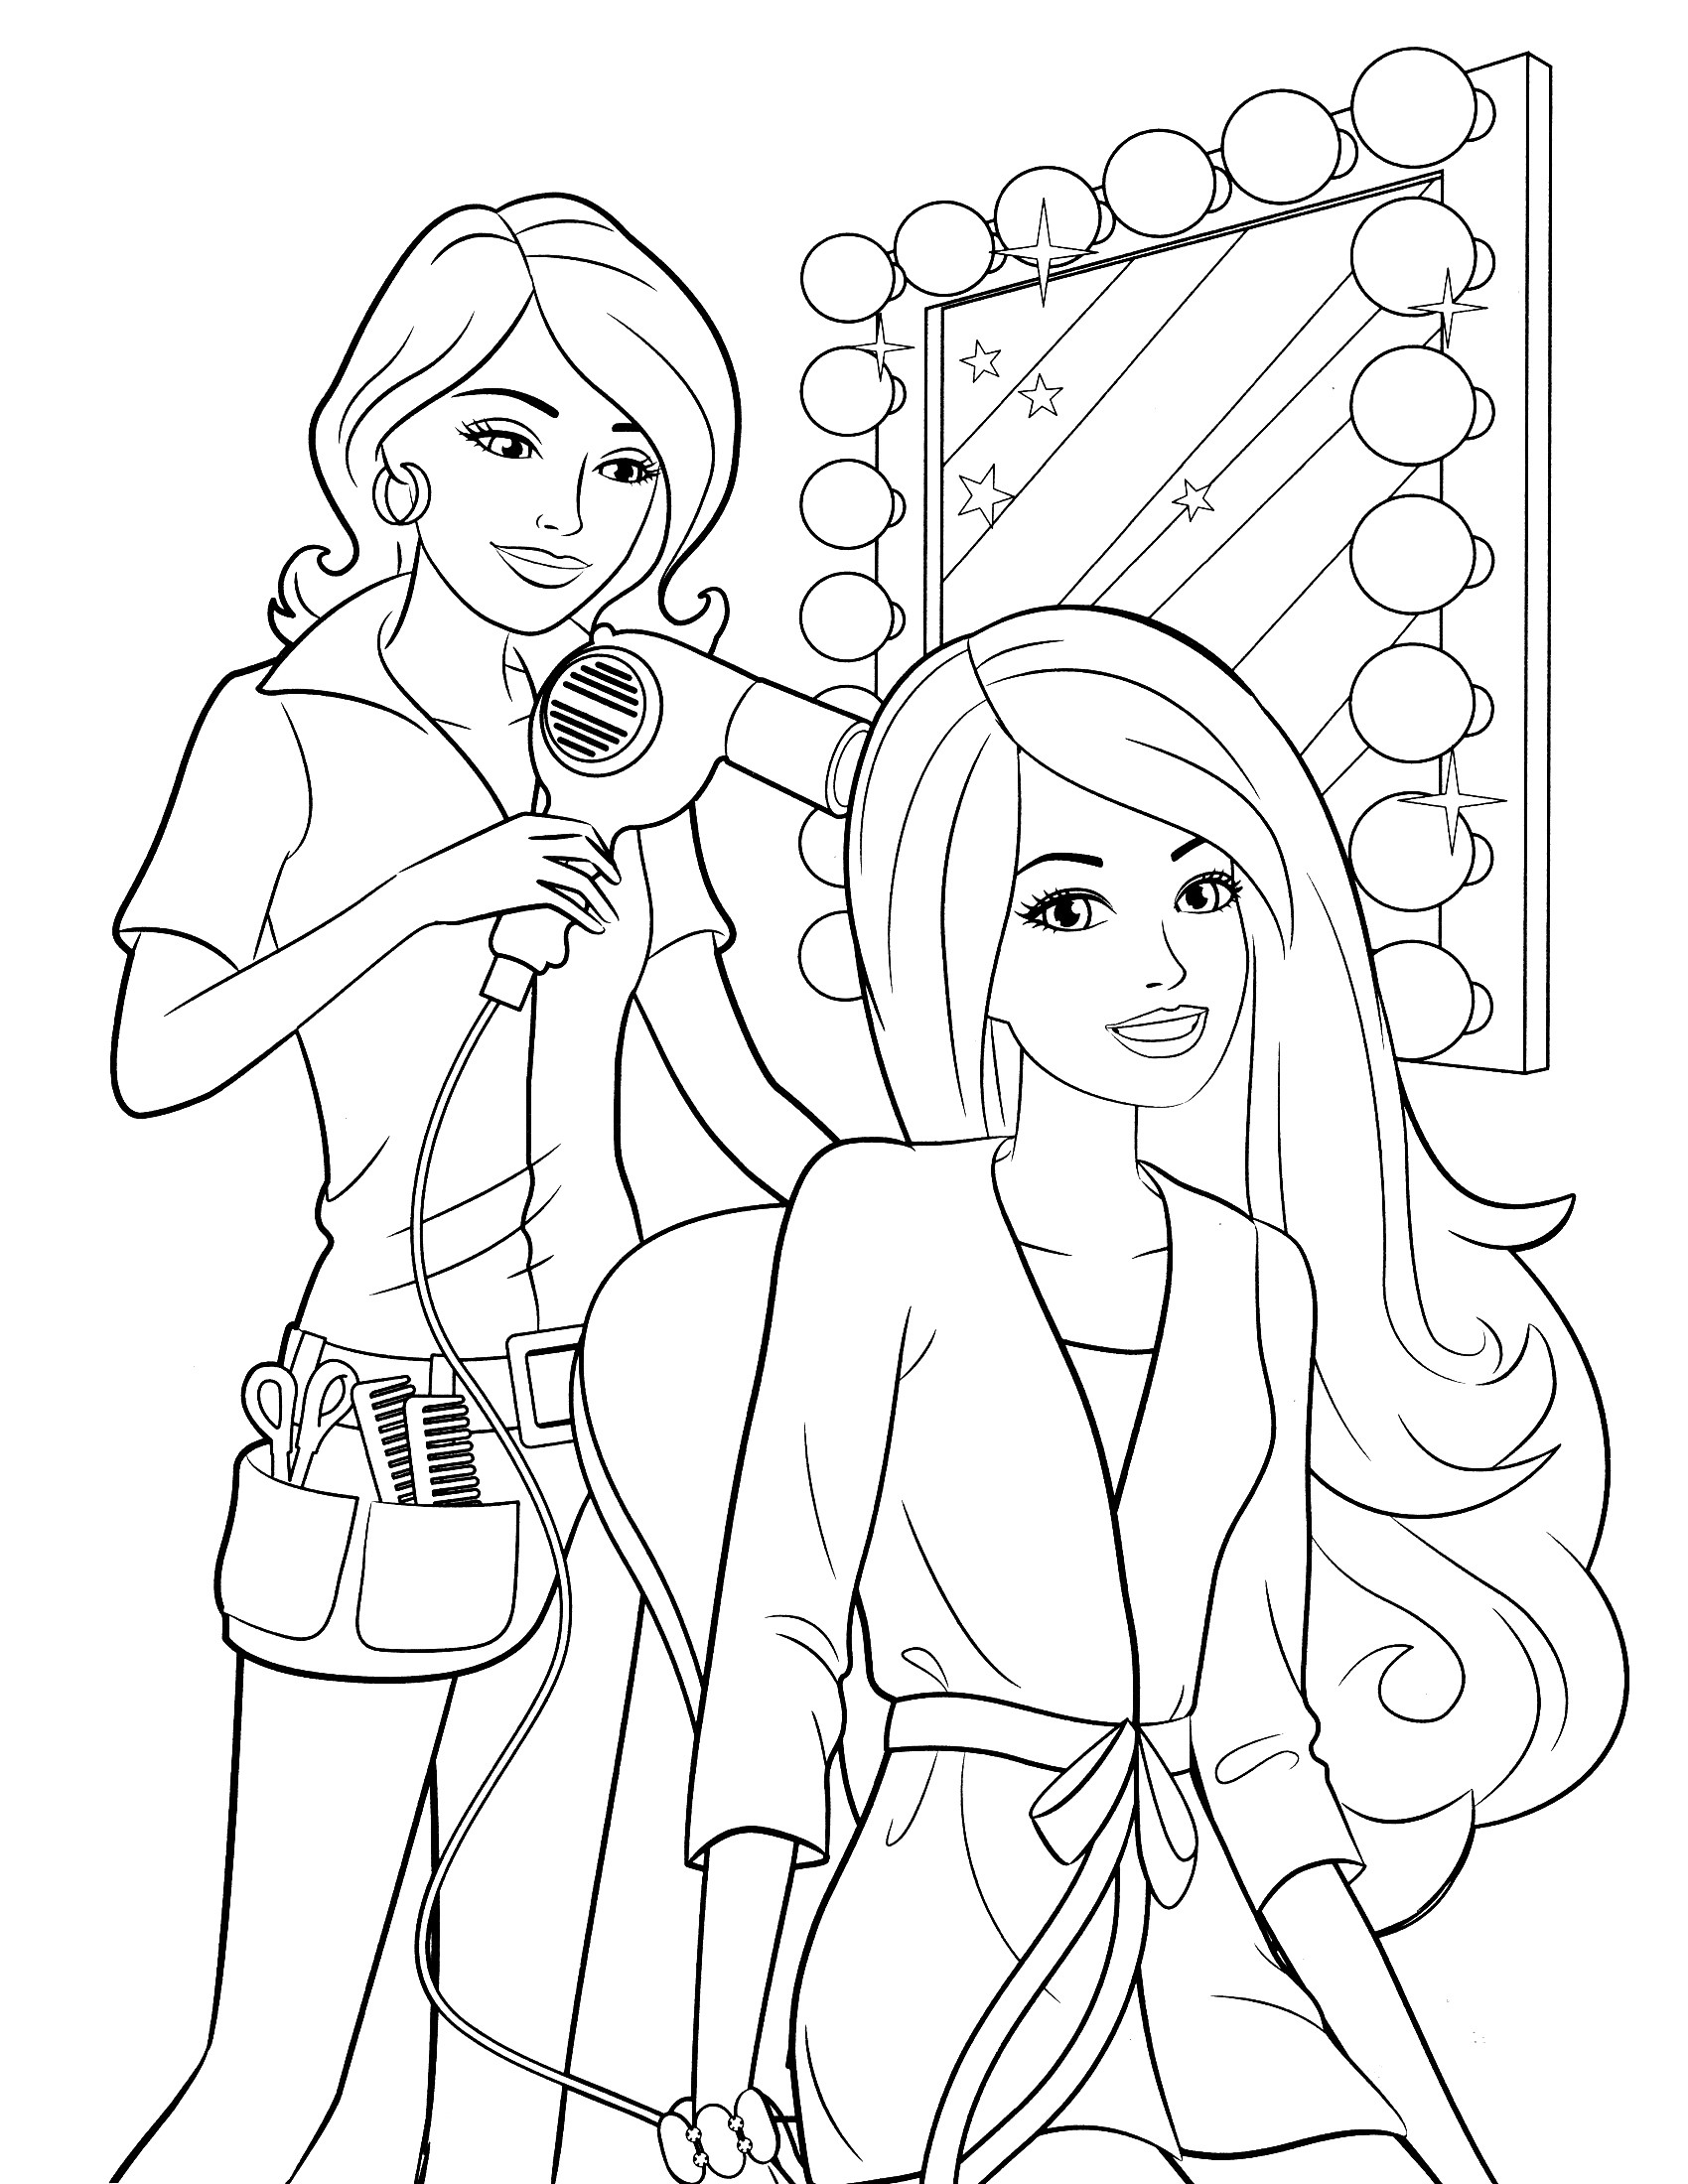 Free Coloring Pages Girls Printable
 Coloring Pages for Girls Best Coloring Pages For Kids